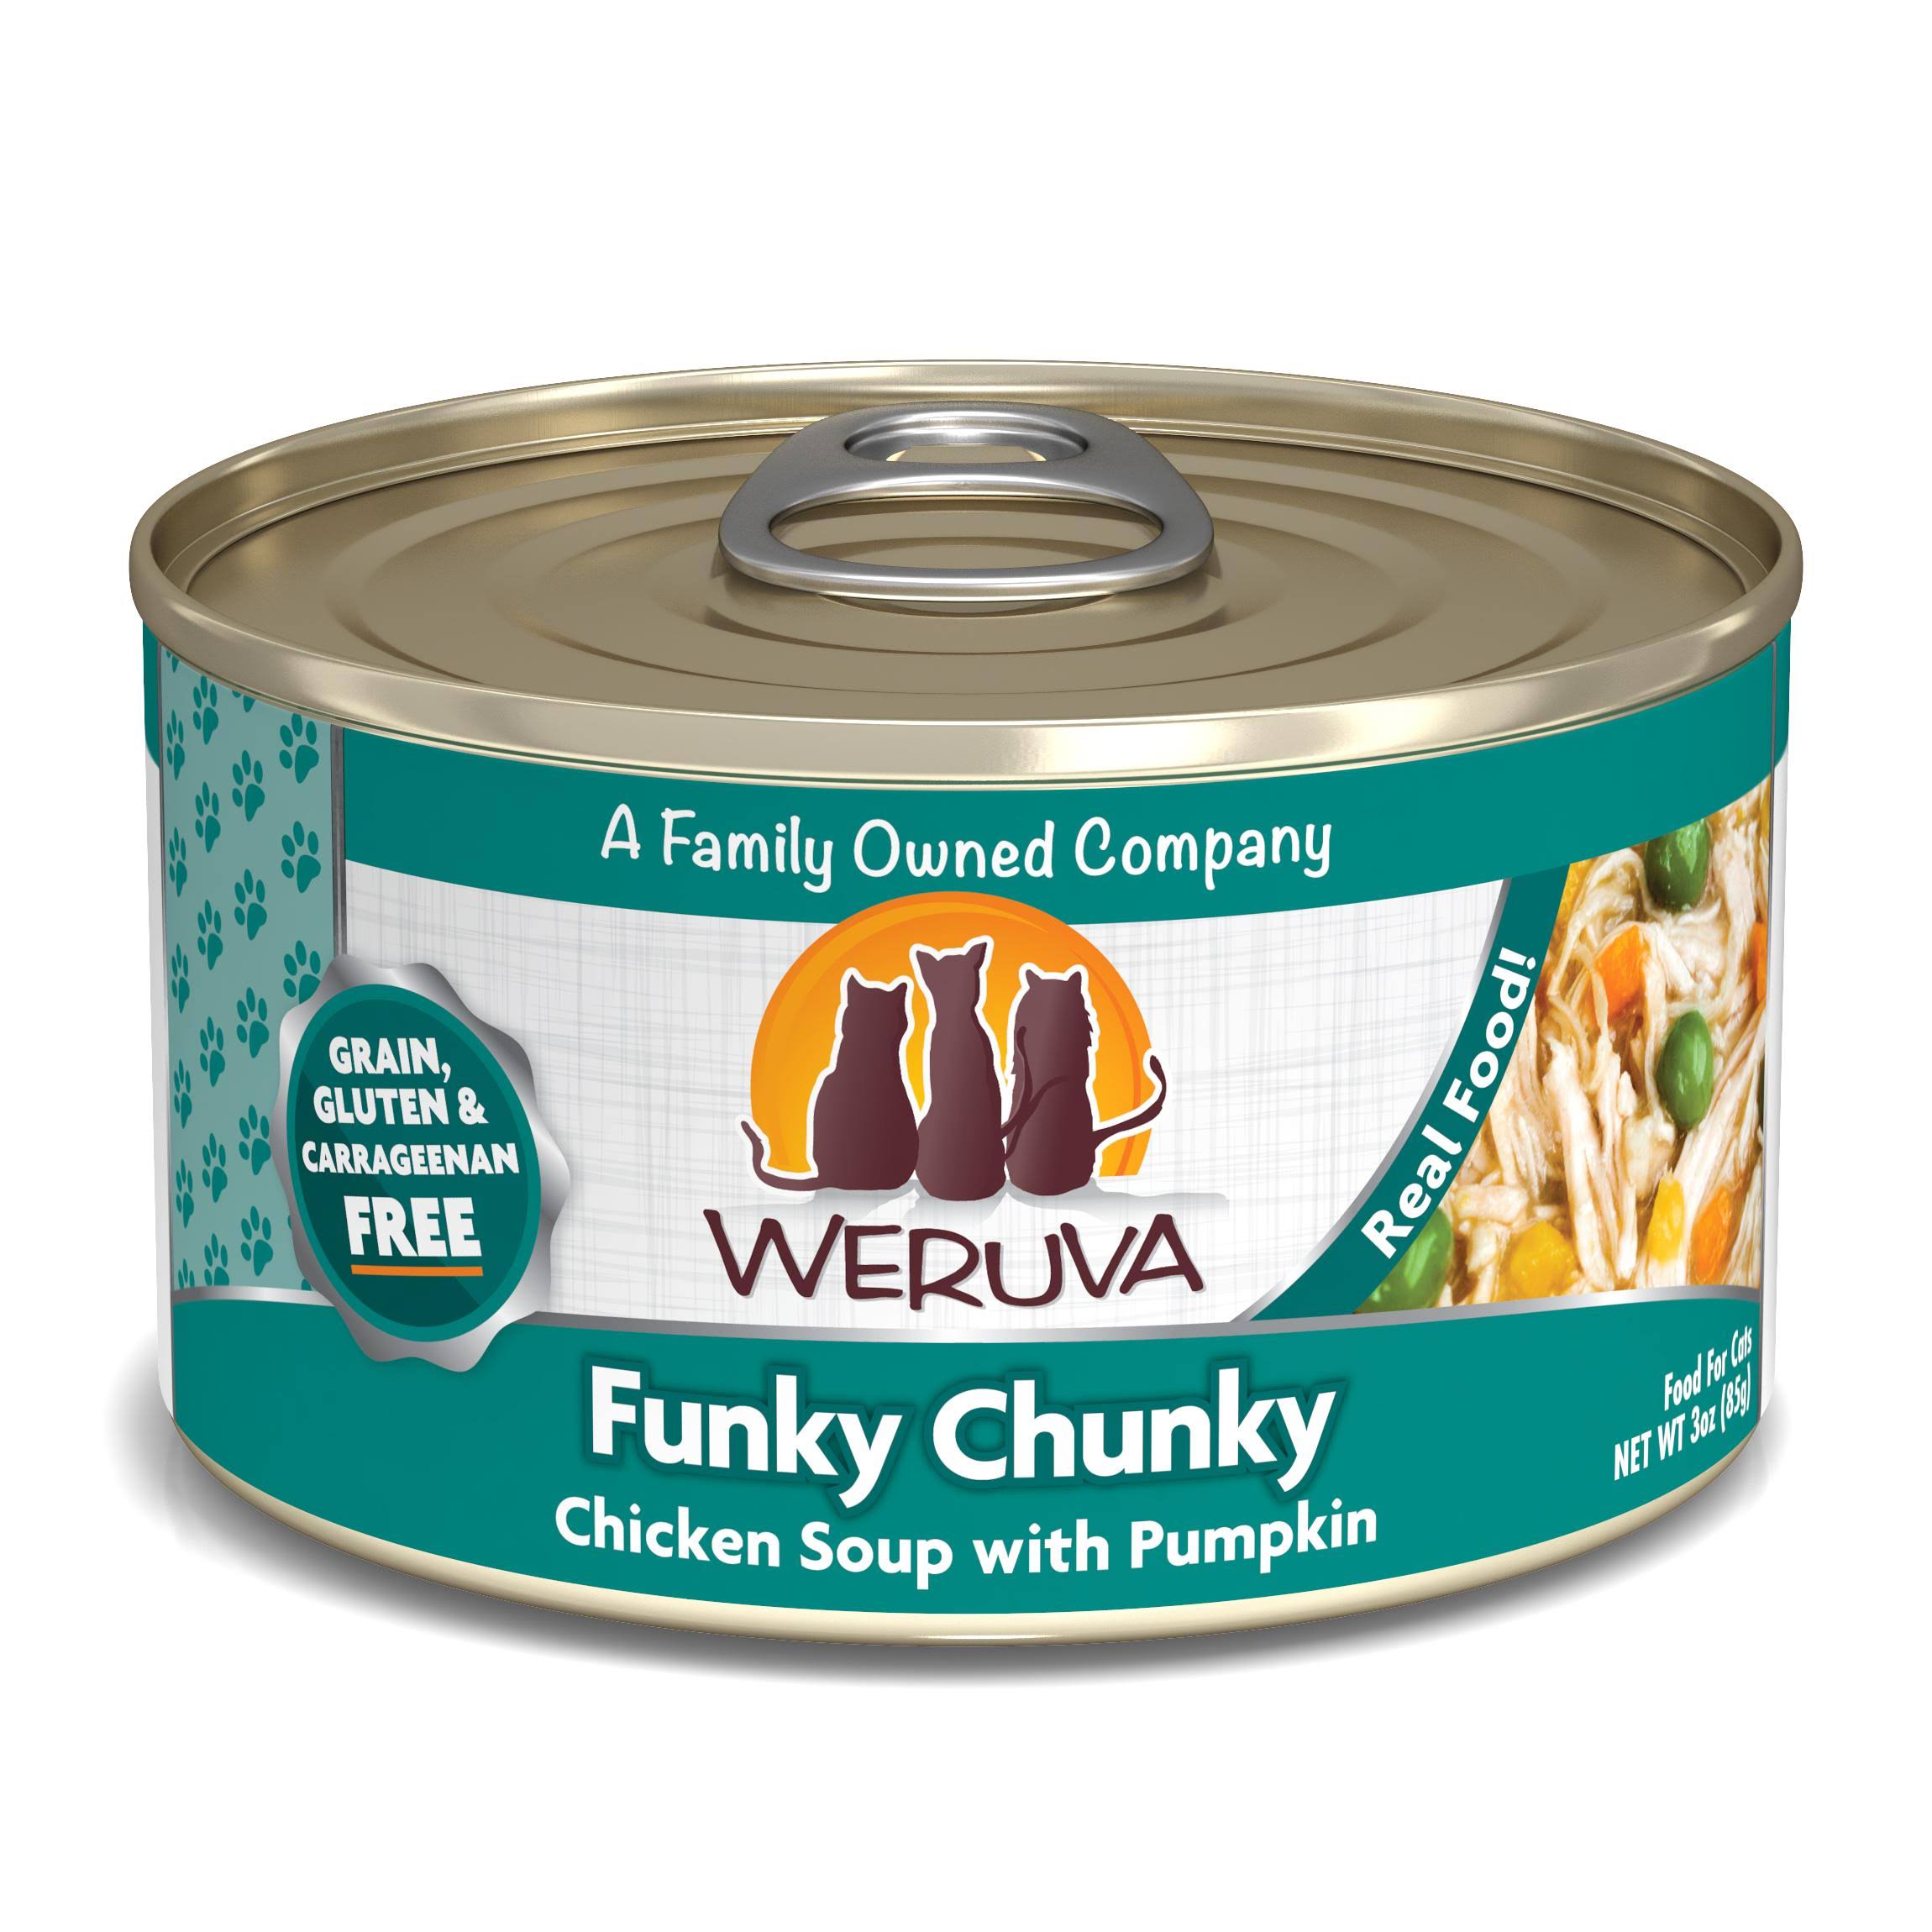 Weruva Funky Chunky Canned Cat Food - Chicken Soup